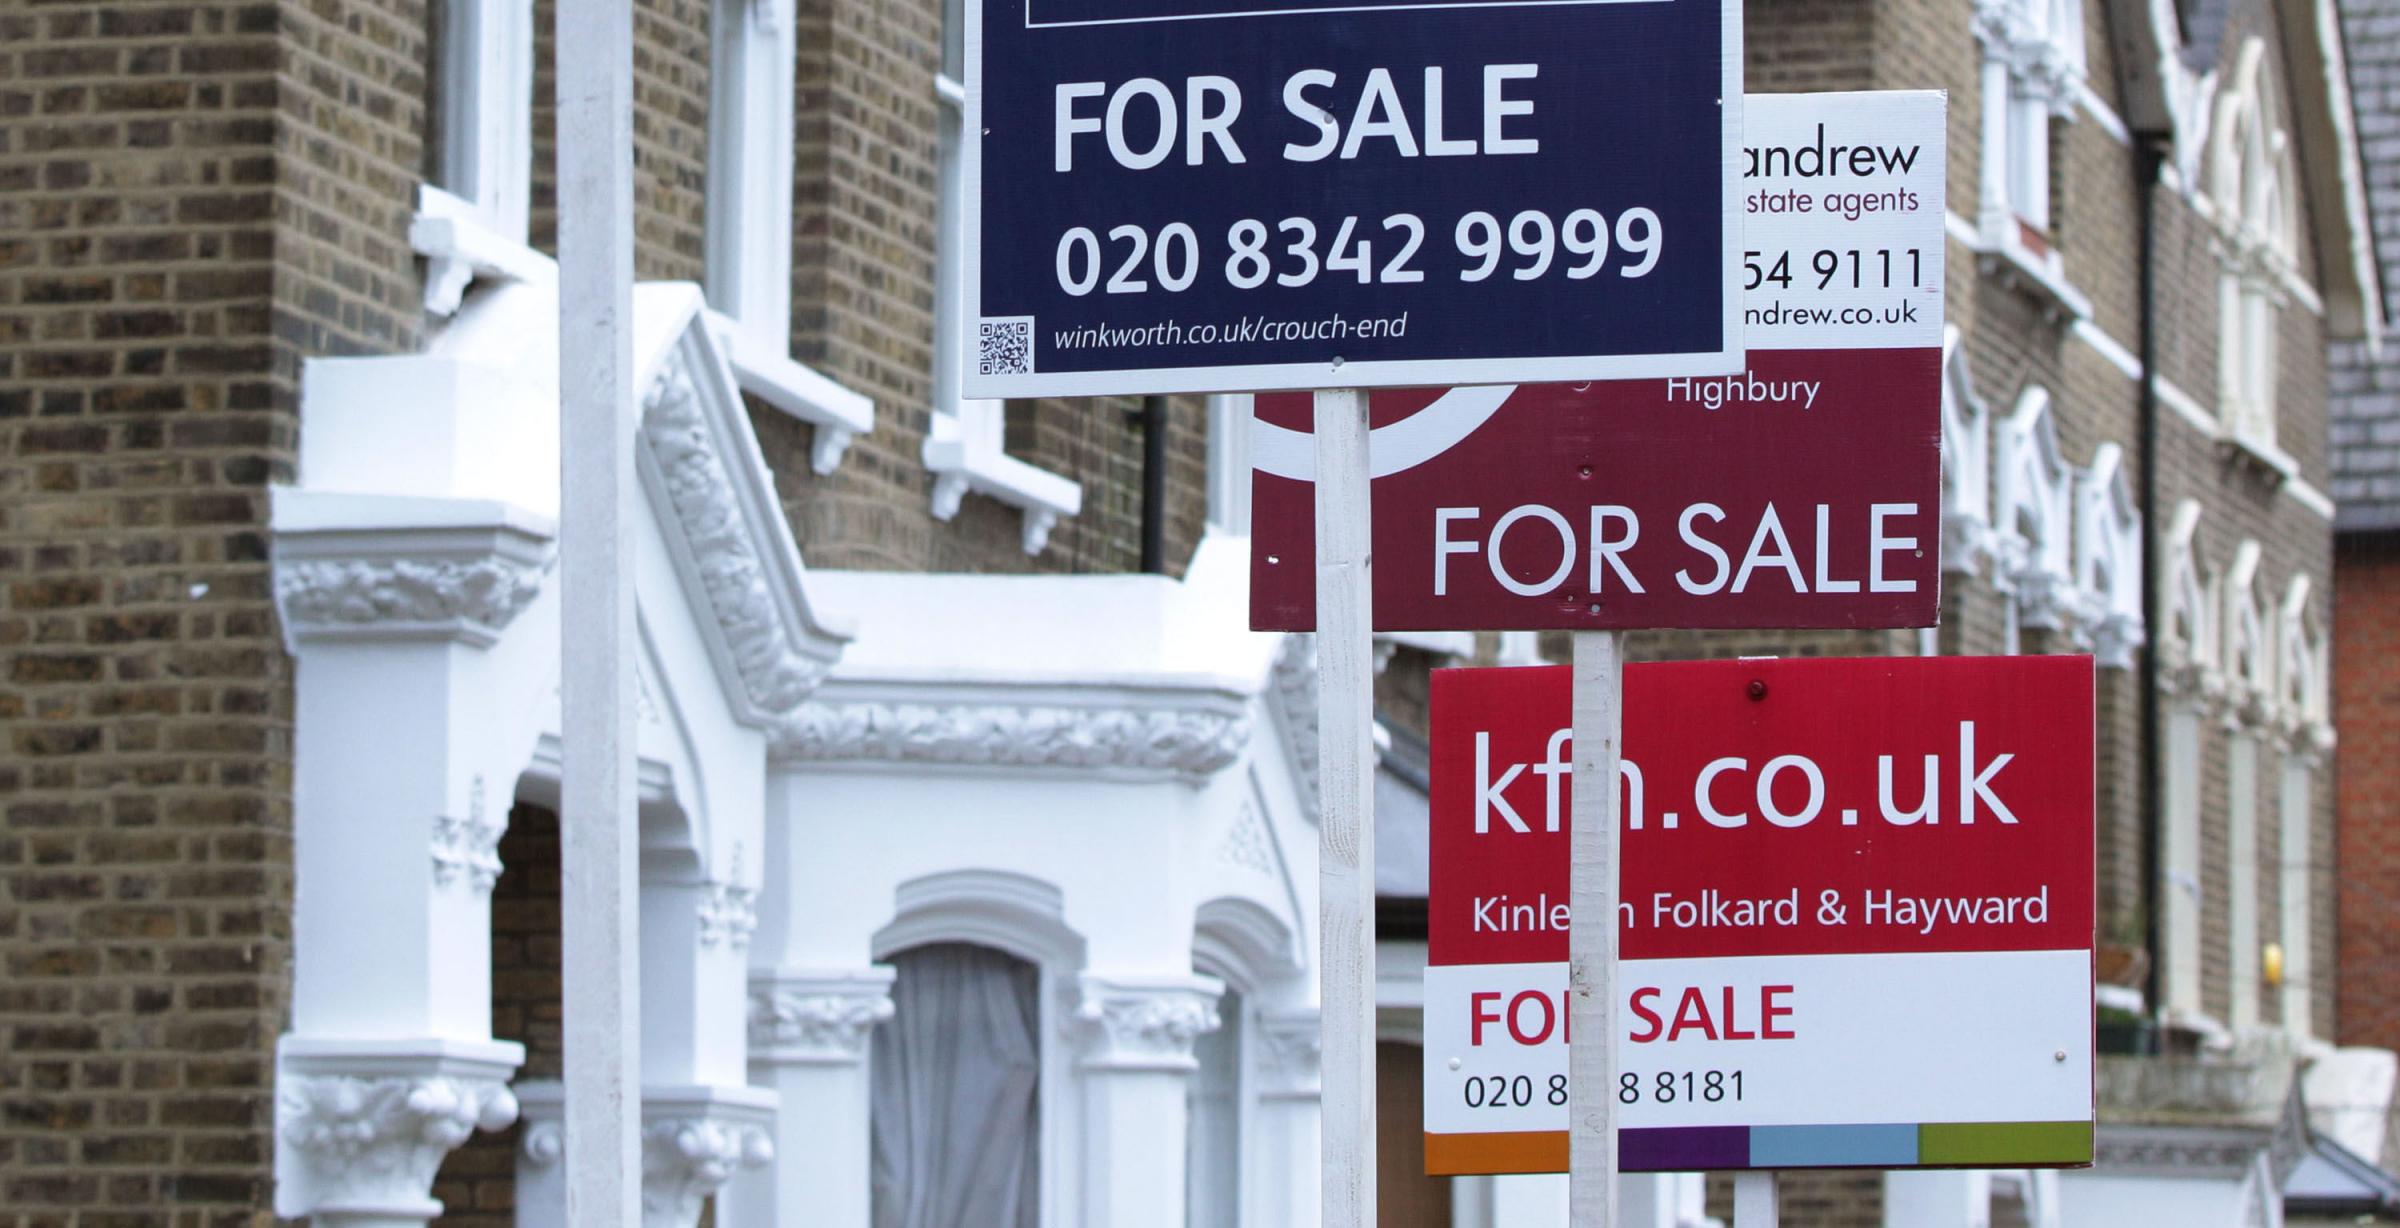 Homes for sale in Brighton and Hove are snapped up three weeks faster than the UK average